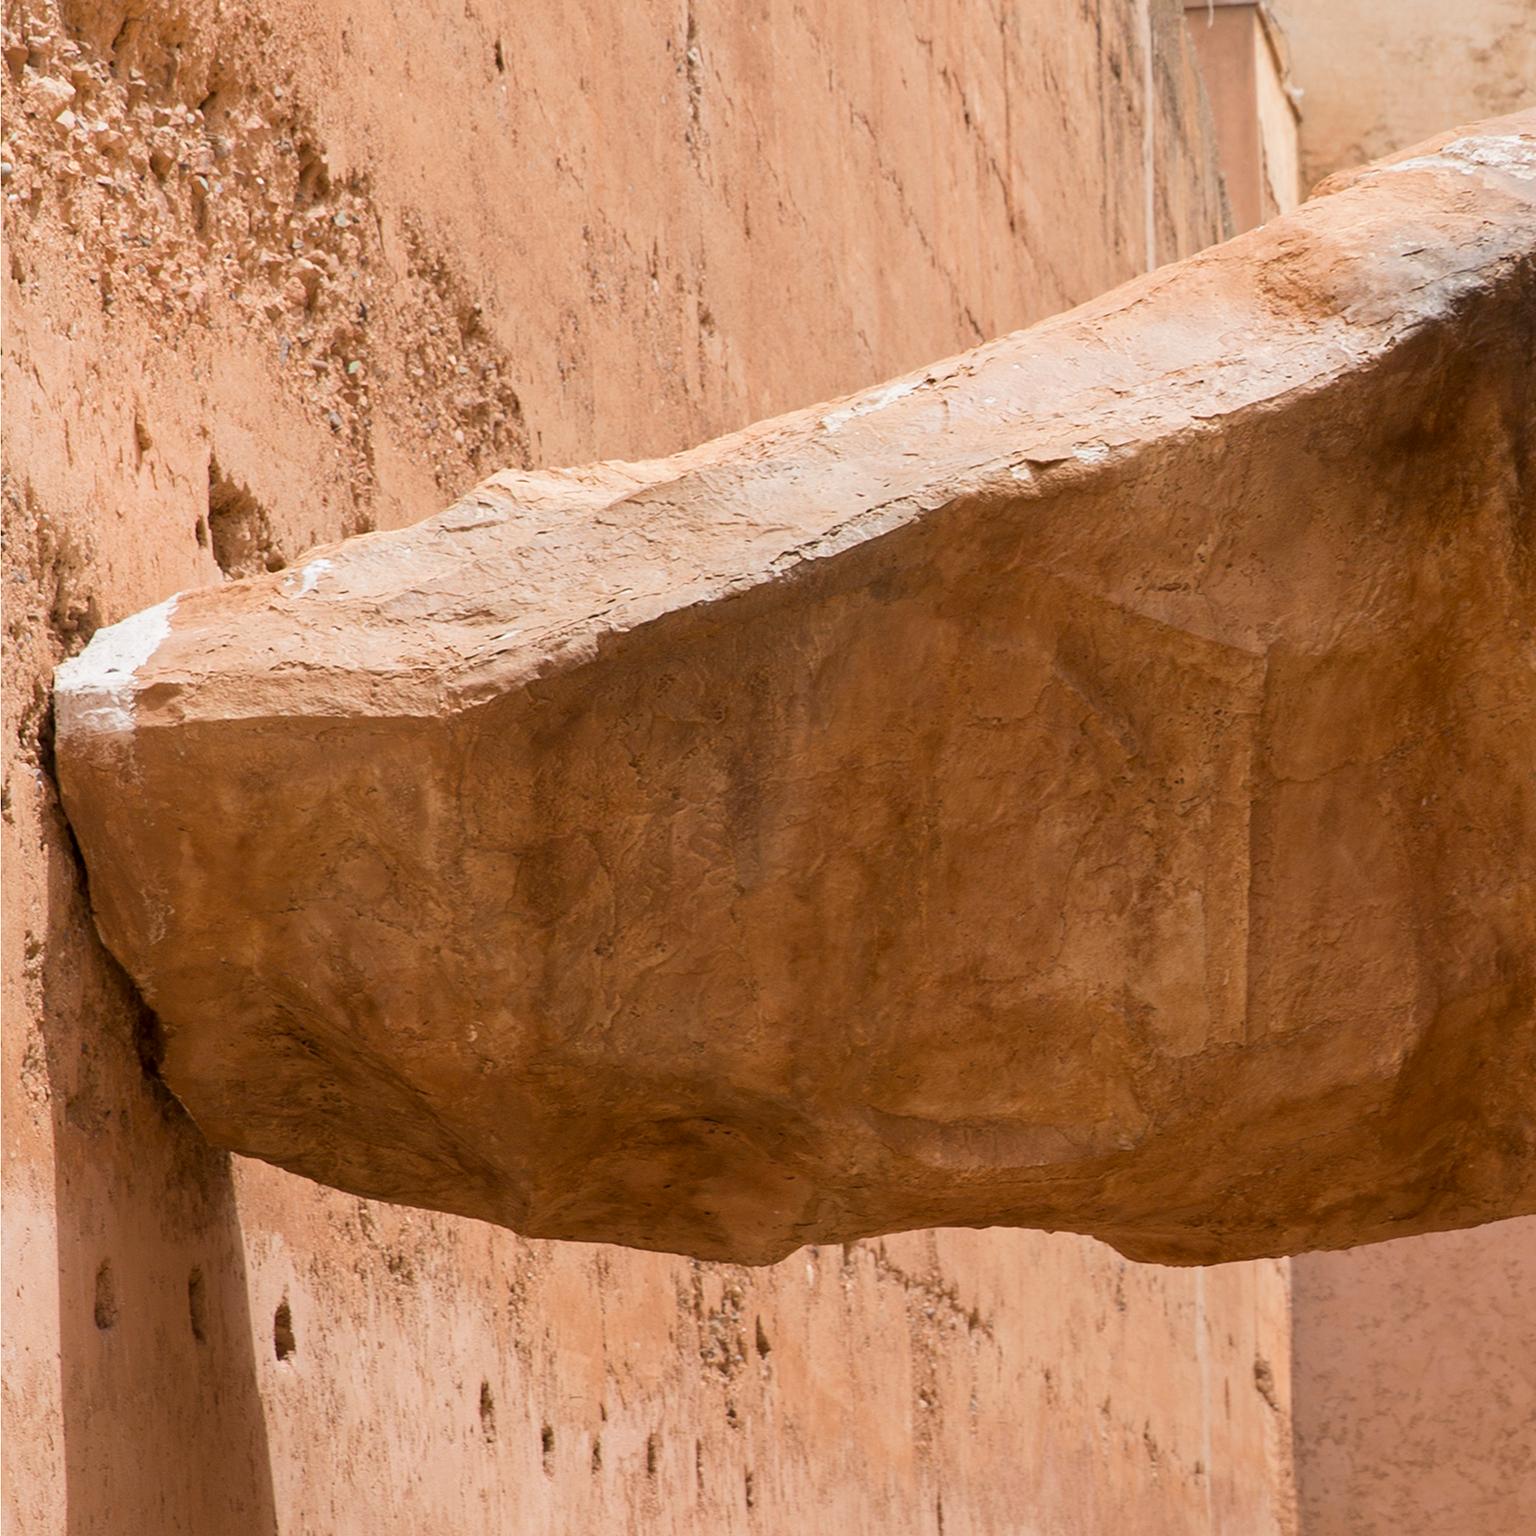 Impossible balancing act.  Marrakesh, Morocco, 2016
Photograph by Cosmo Condina. An impossibly large  rock supported by two walls in a courtyard.
Archival pigment print 19 X 12.45 in.  Edition of 10. This is # 3/10 in the edition.

 'Palace of